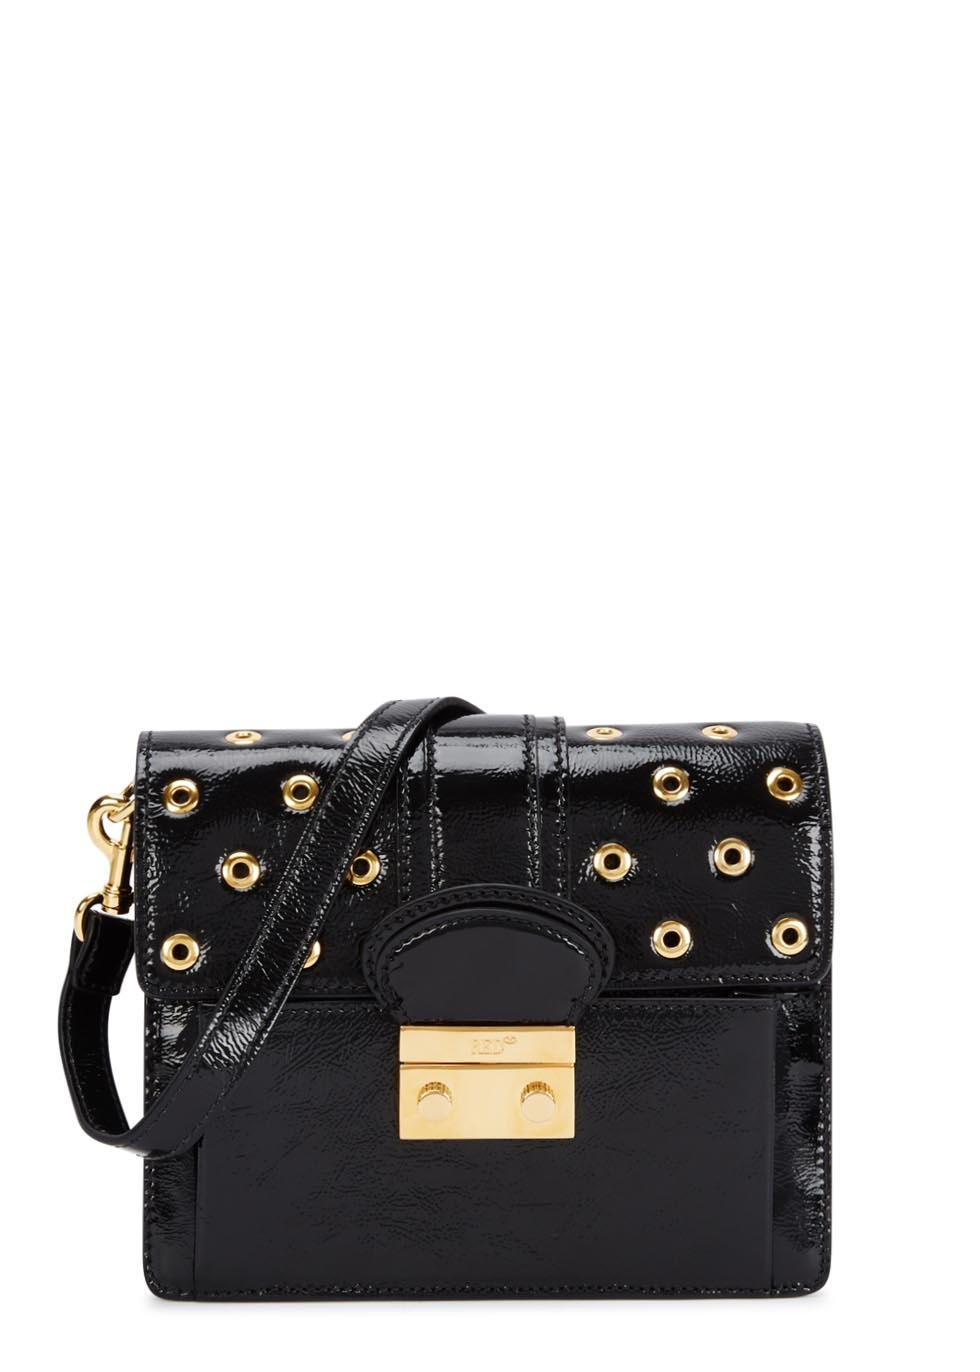 Red Valentino Small Black Patent Leather Shoulder Bag in Black - Lyst